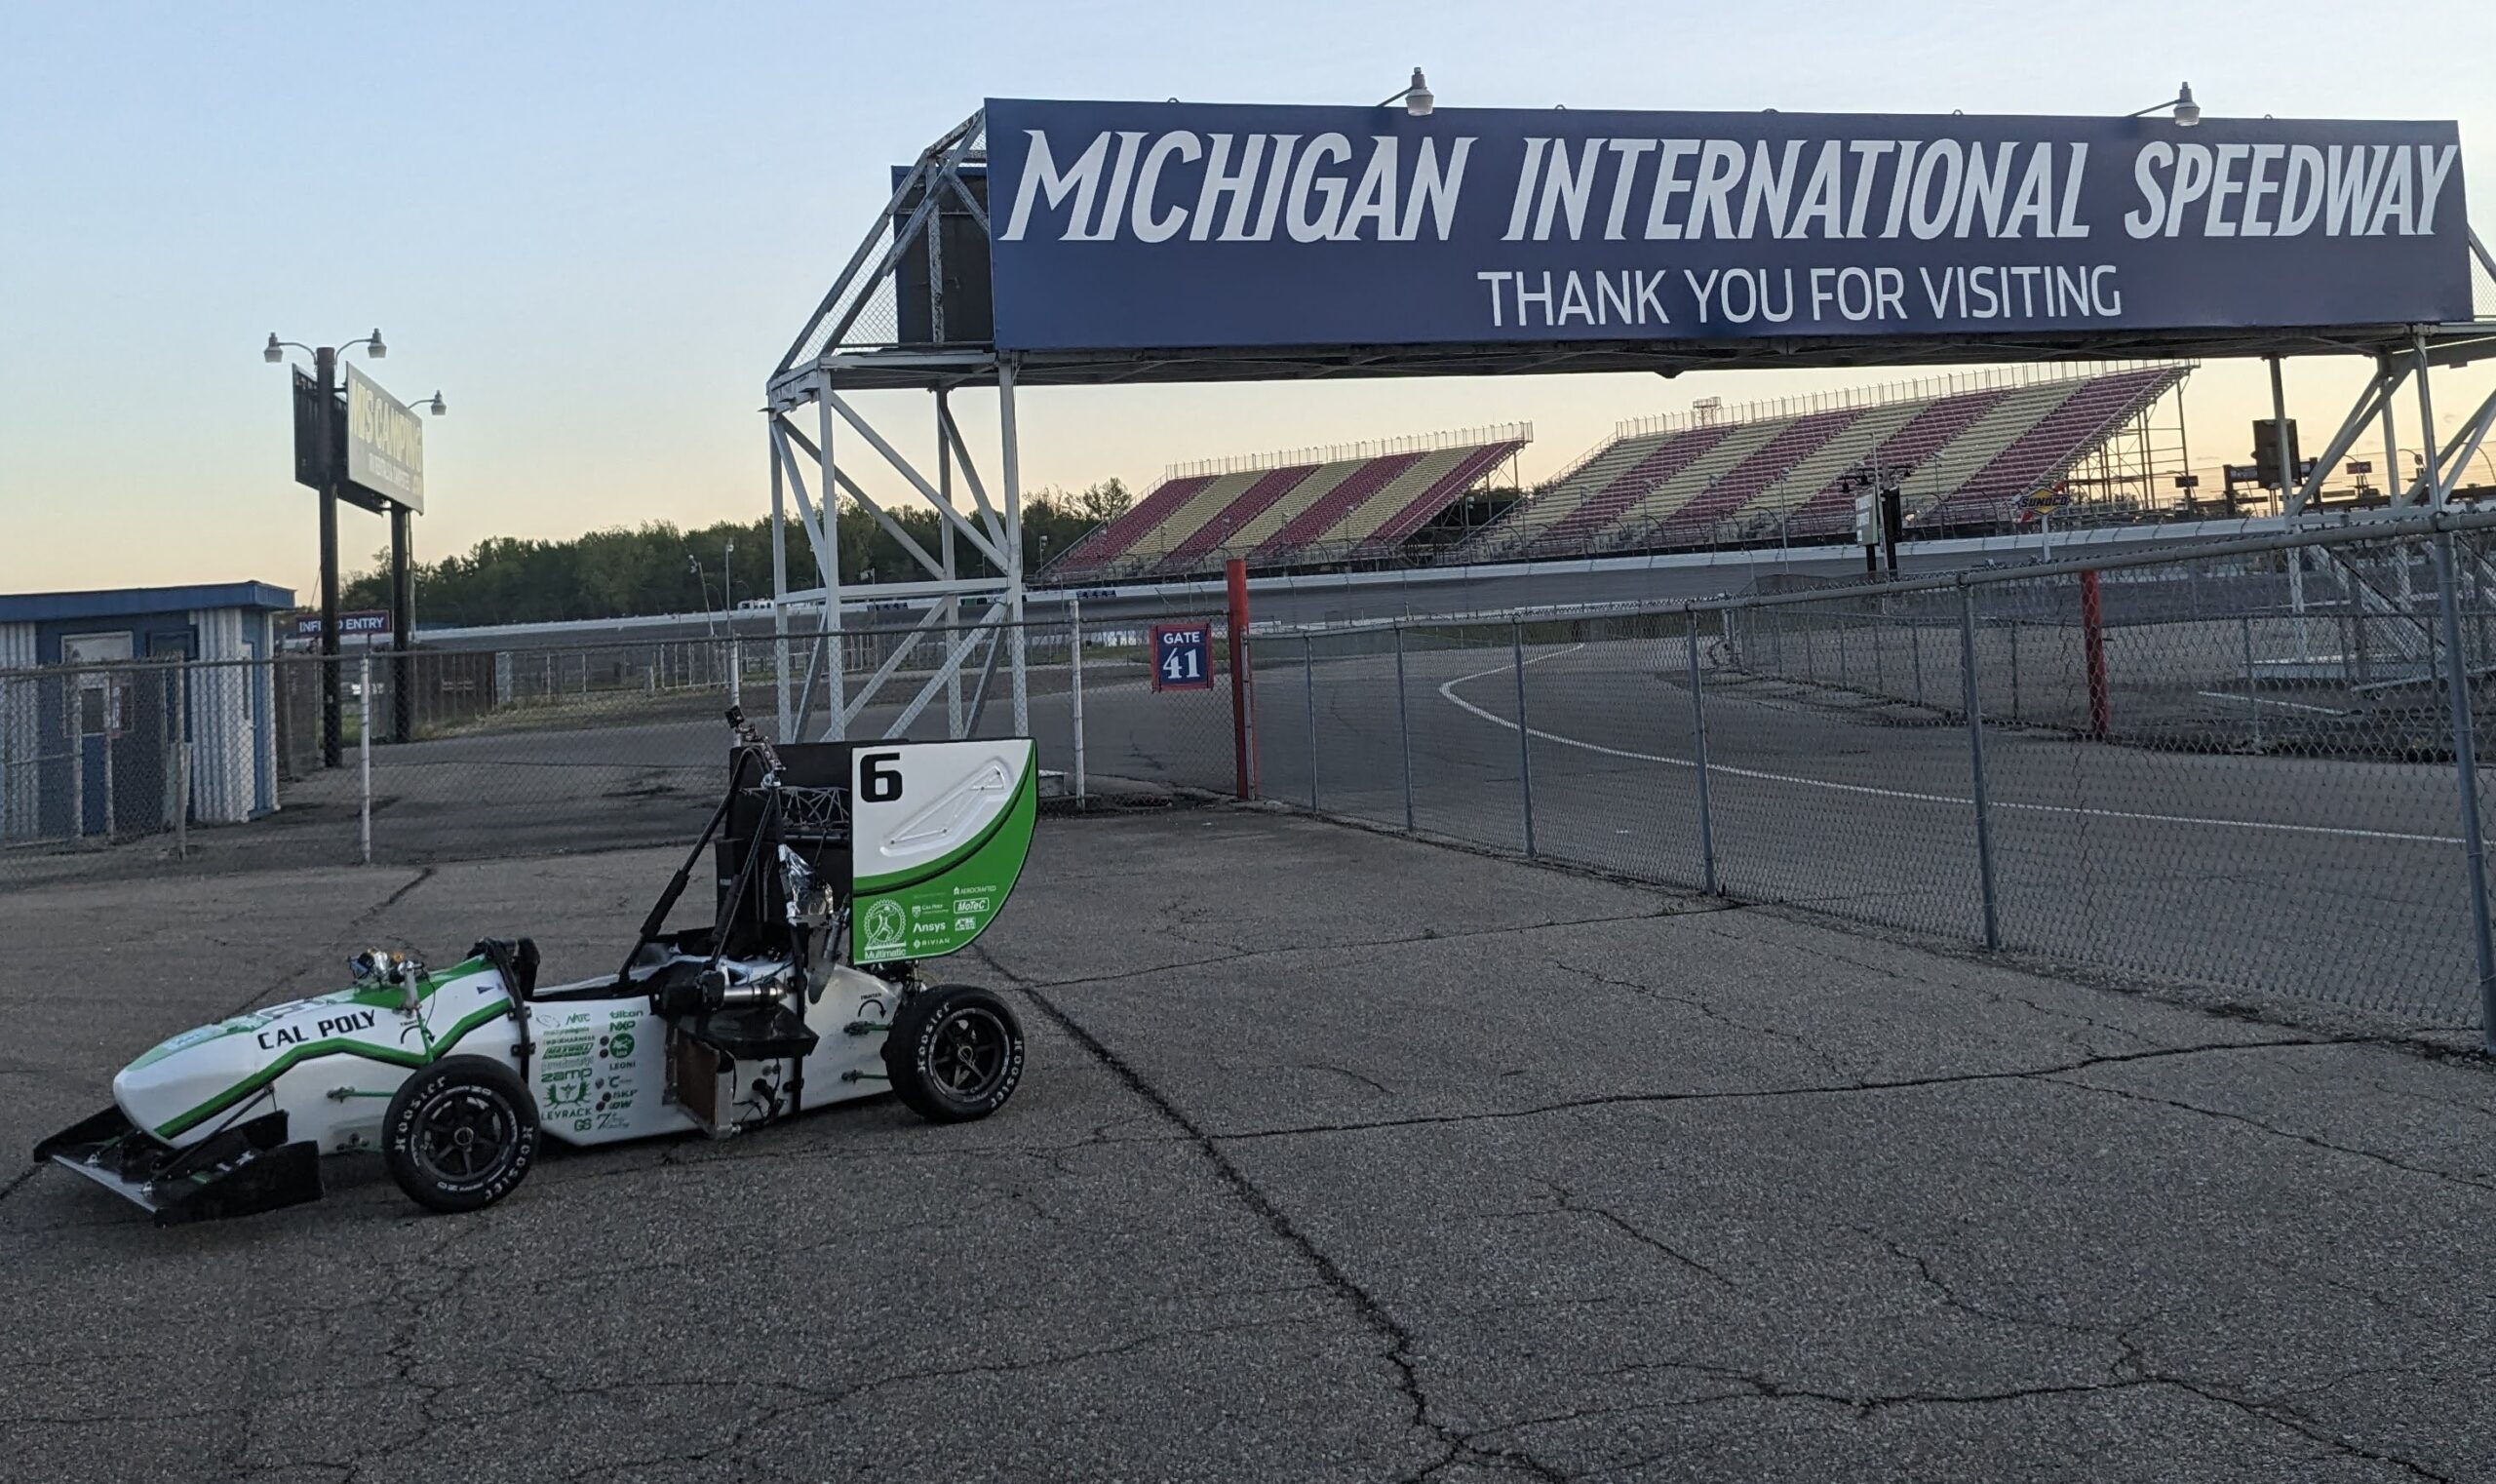 Cal Poly Racing's Formula car sits on the track at the Michigan International Speedway